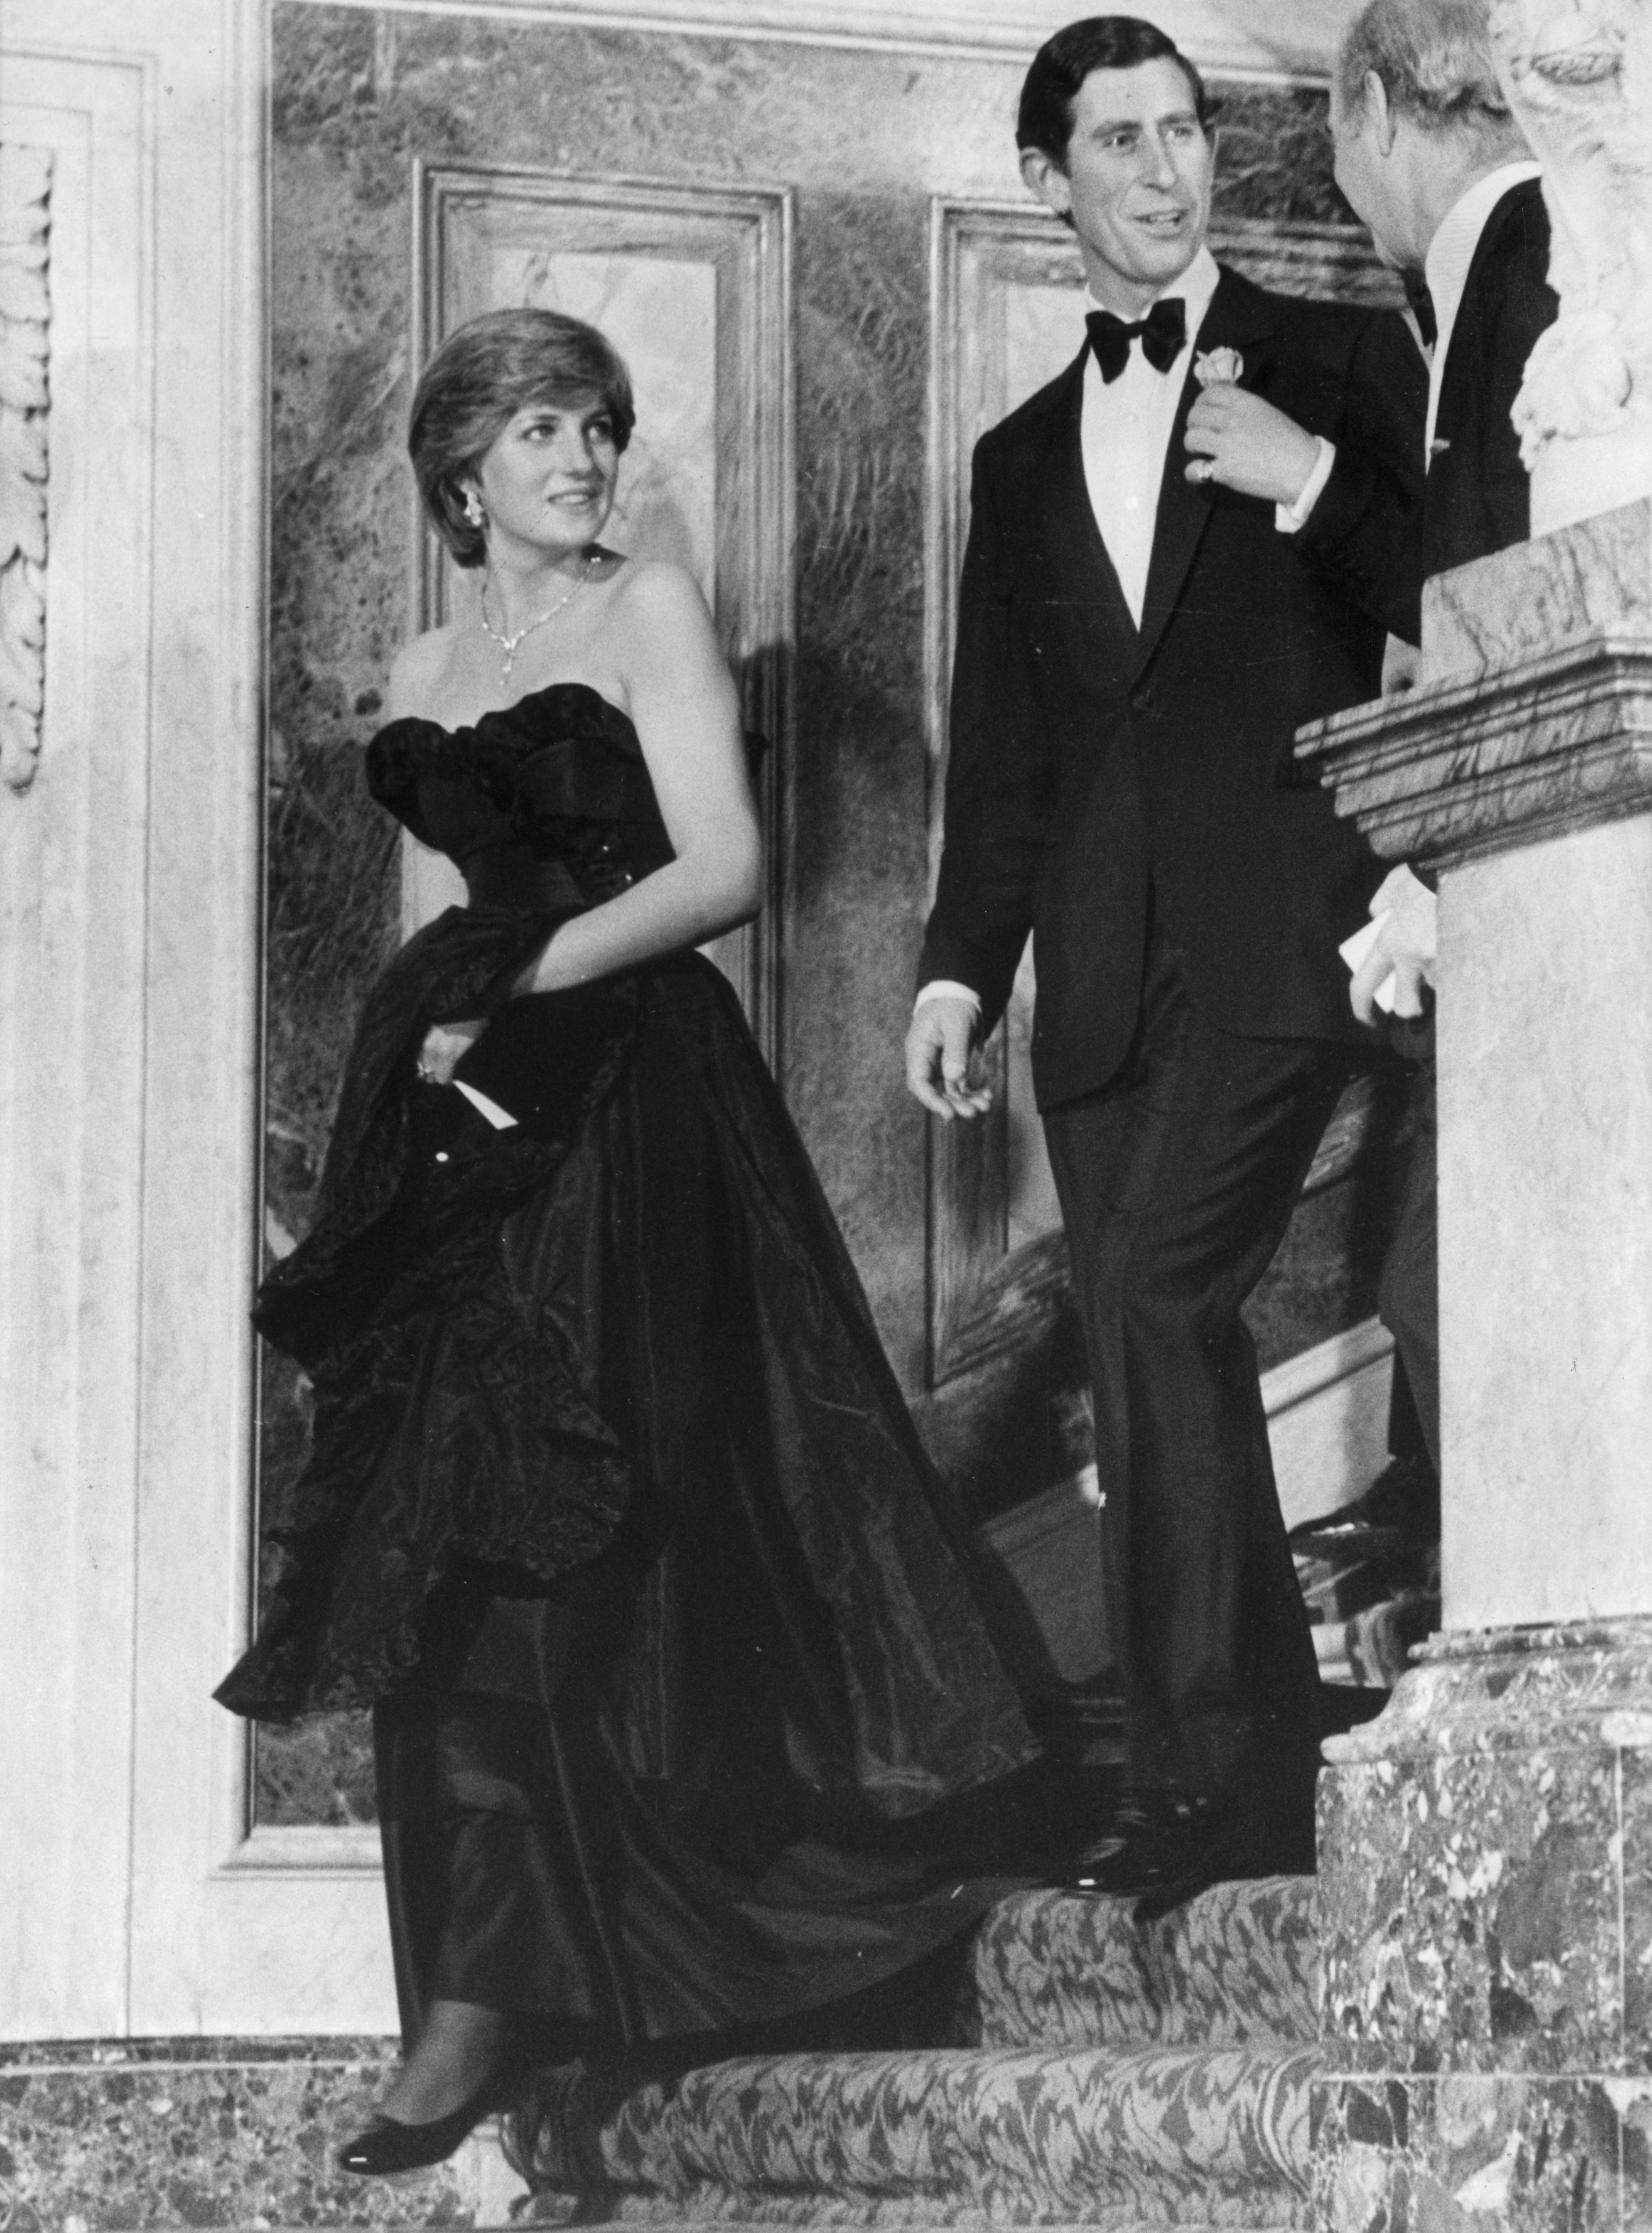 Lady Diana Spencer and Prince Charles at their first public engagement together, a recital at London's Goldsmith's Hall on March 9, 1981. | Source: Central Press/Getty Images